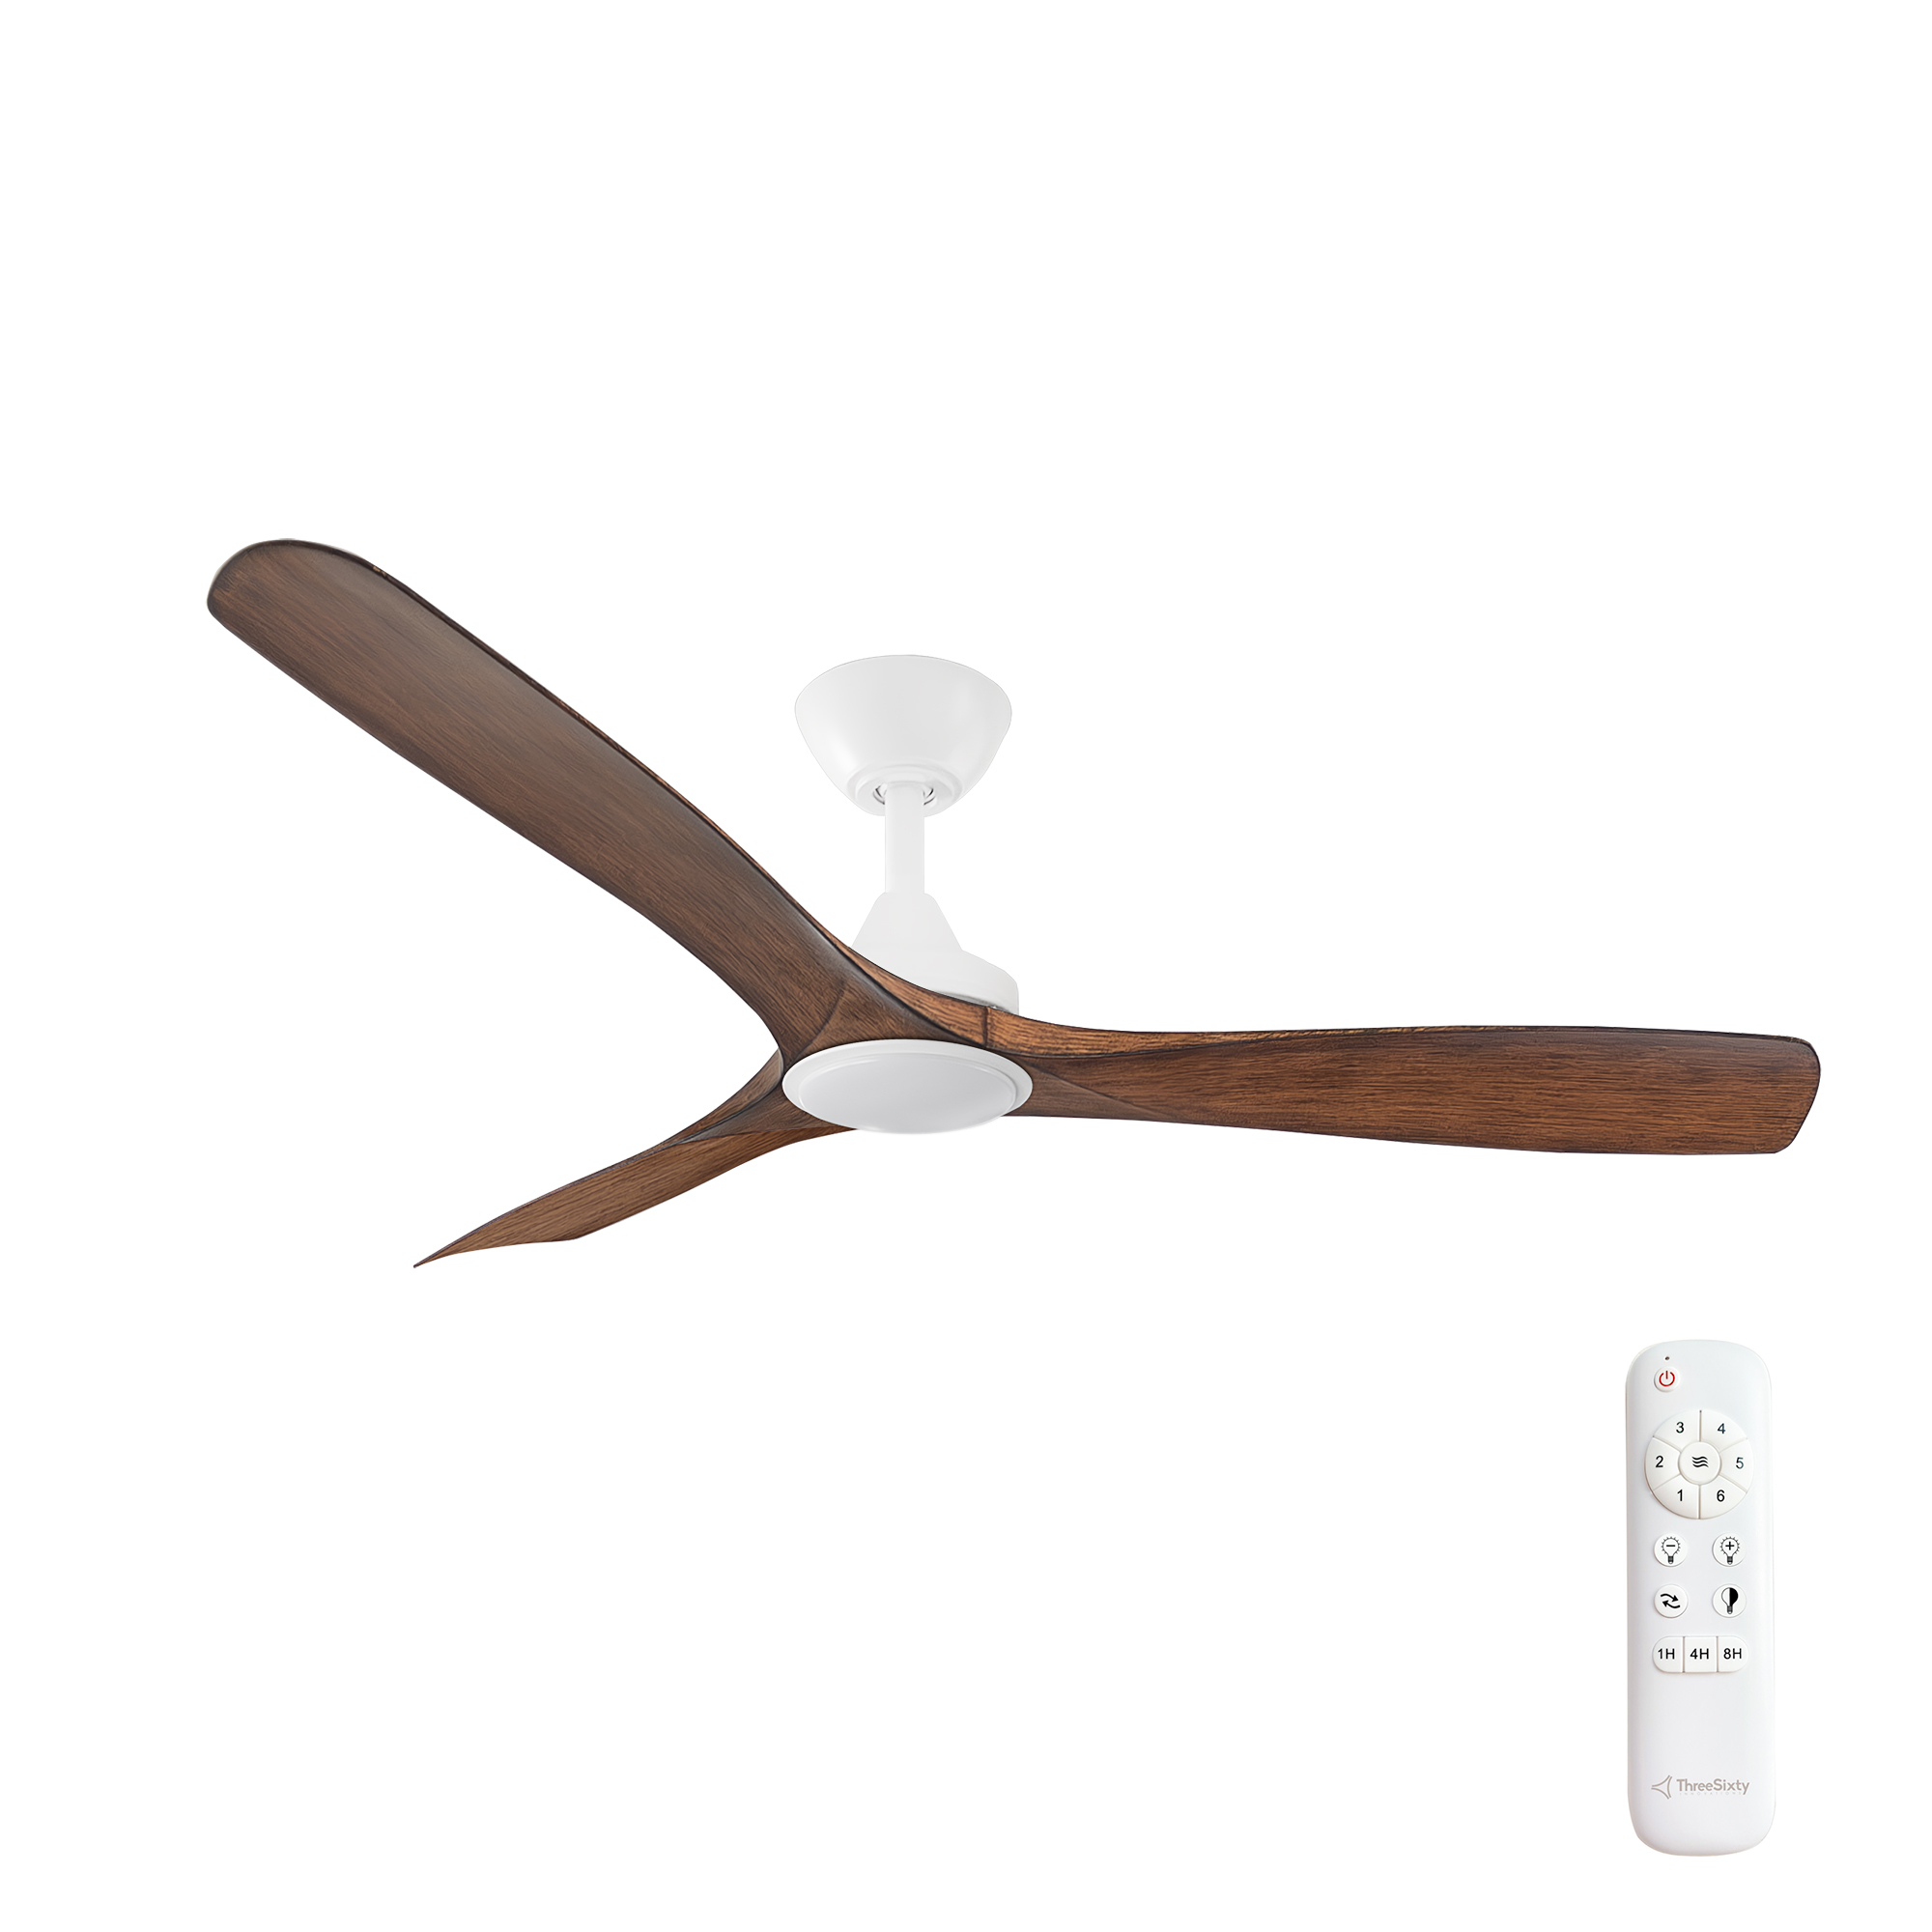 52" Spitfire DC Ceiling Fan in Matte White with Koa blades and 18W LED Light